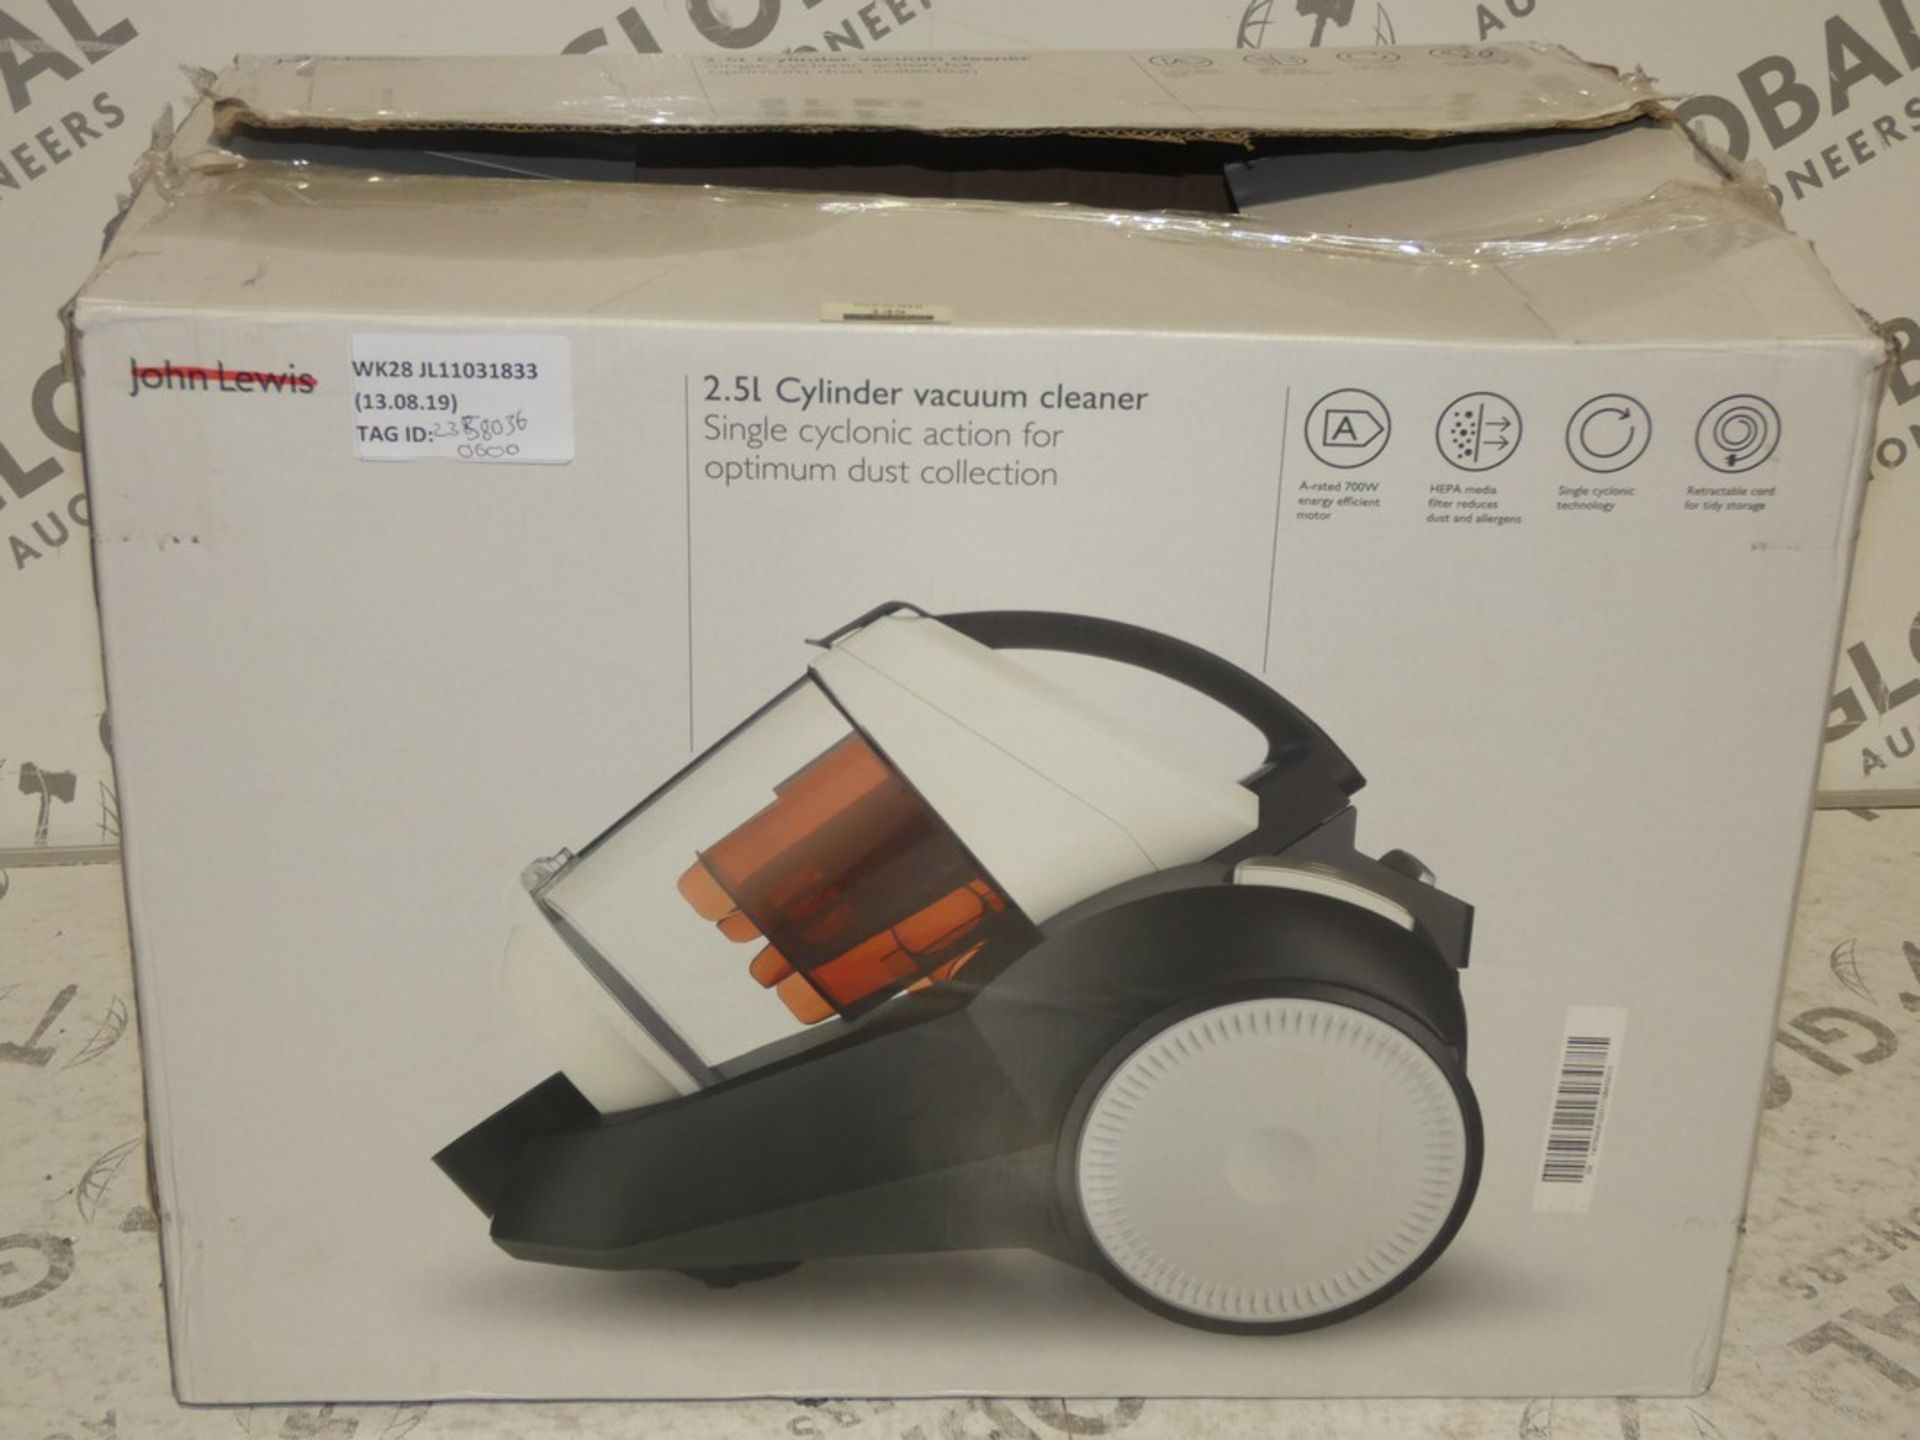 Boxed John Lewis And Partners Cylinder Vacuum Cleaner RRP £60 (2358036) (Viewings And Appraisals Are